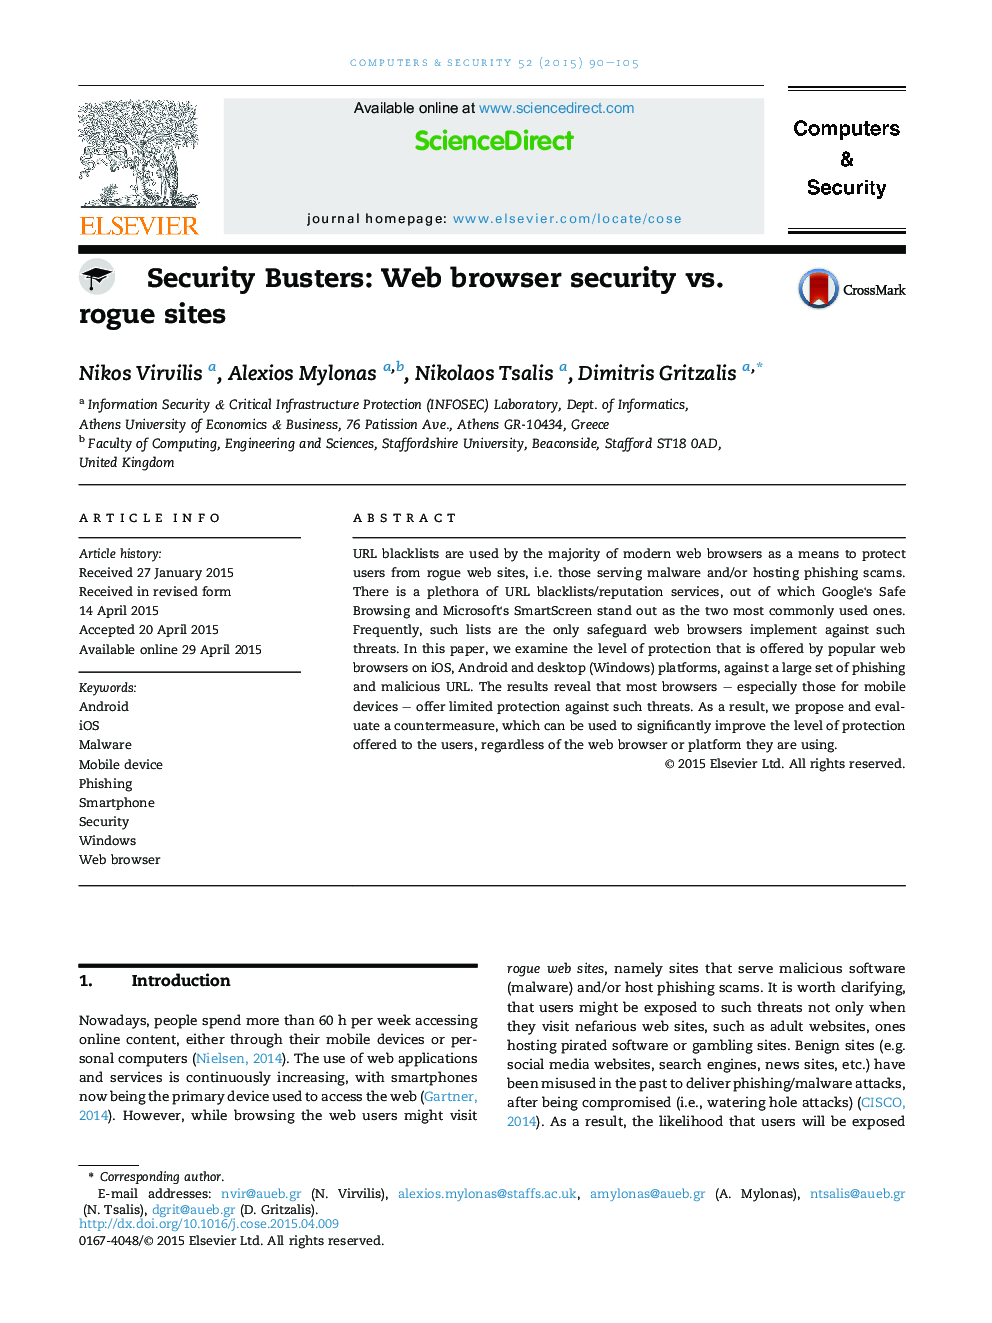 Security Busters: Web browser security vs. rogue sites